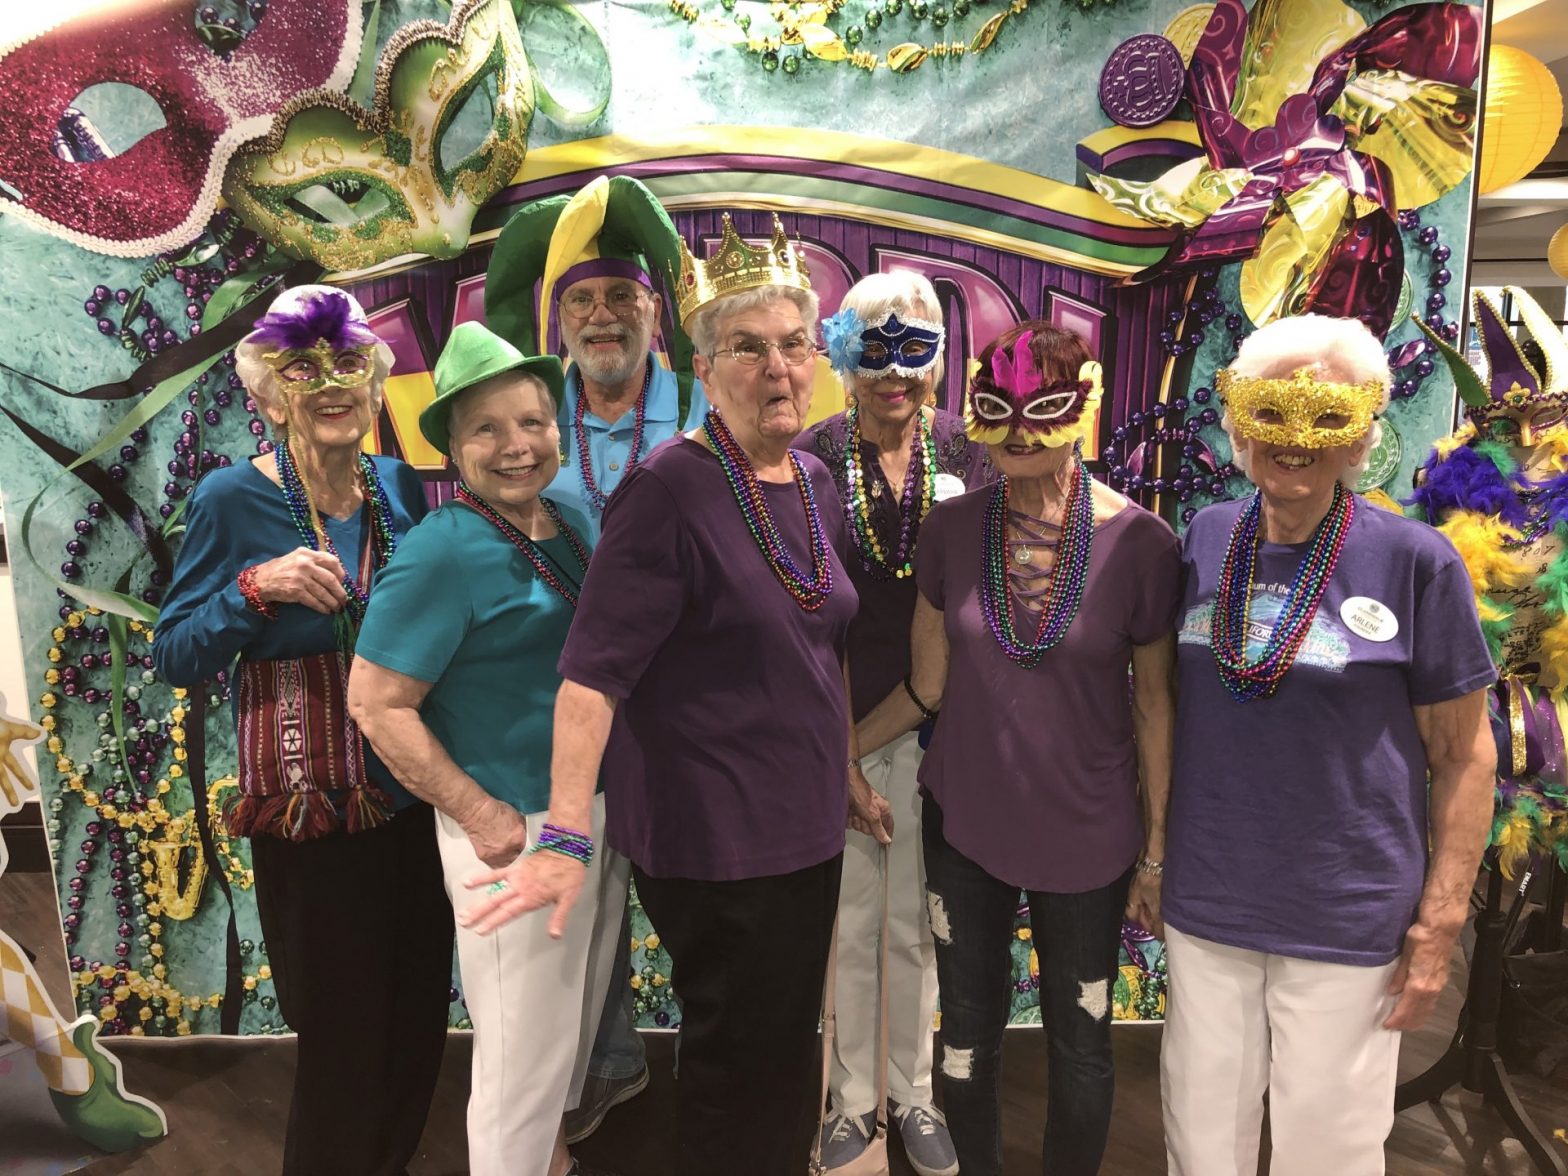 Senior residents pose in a group during Mardi Gras themed party, wearing Mardi Gras themed props.